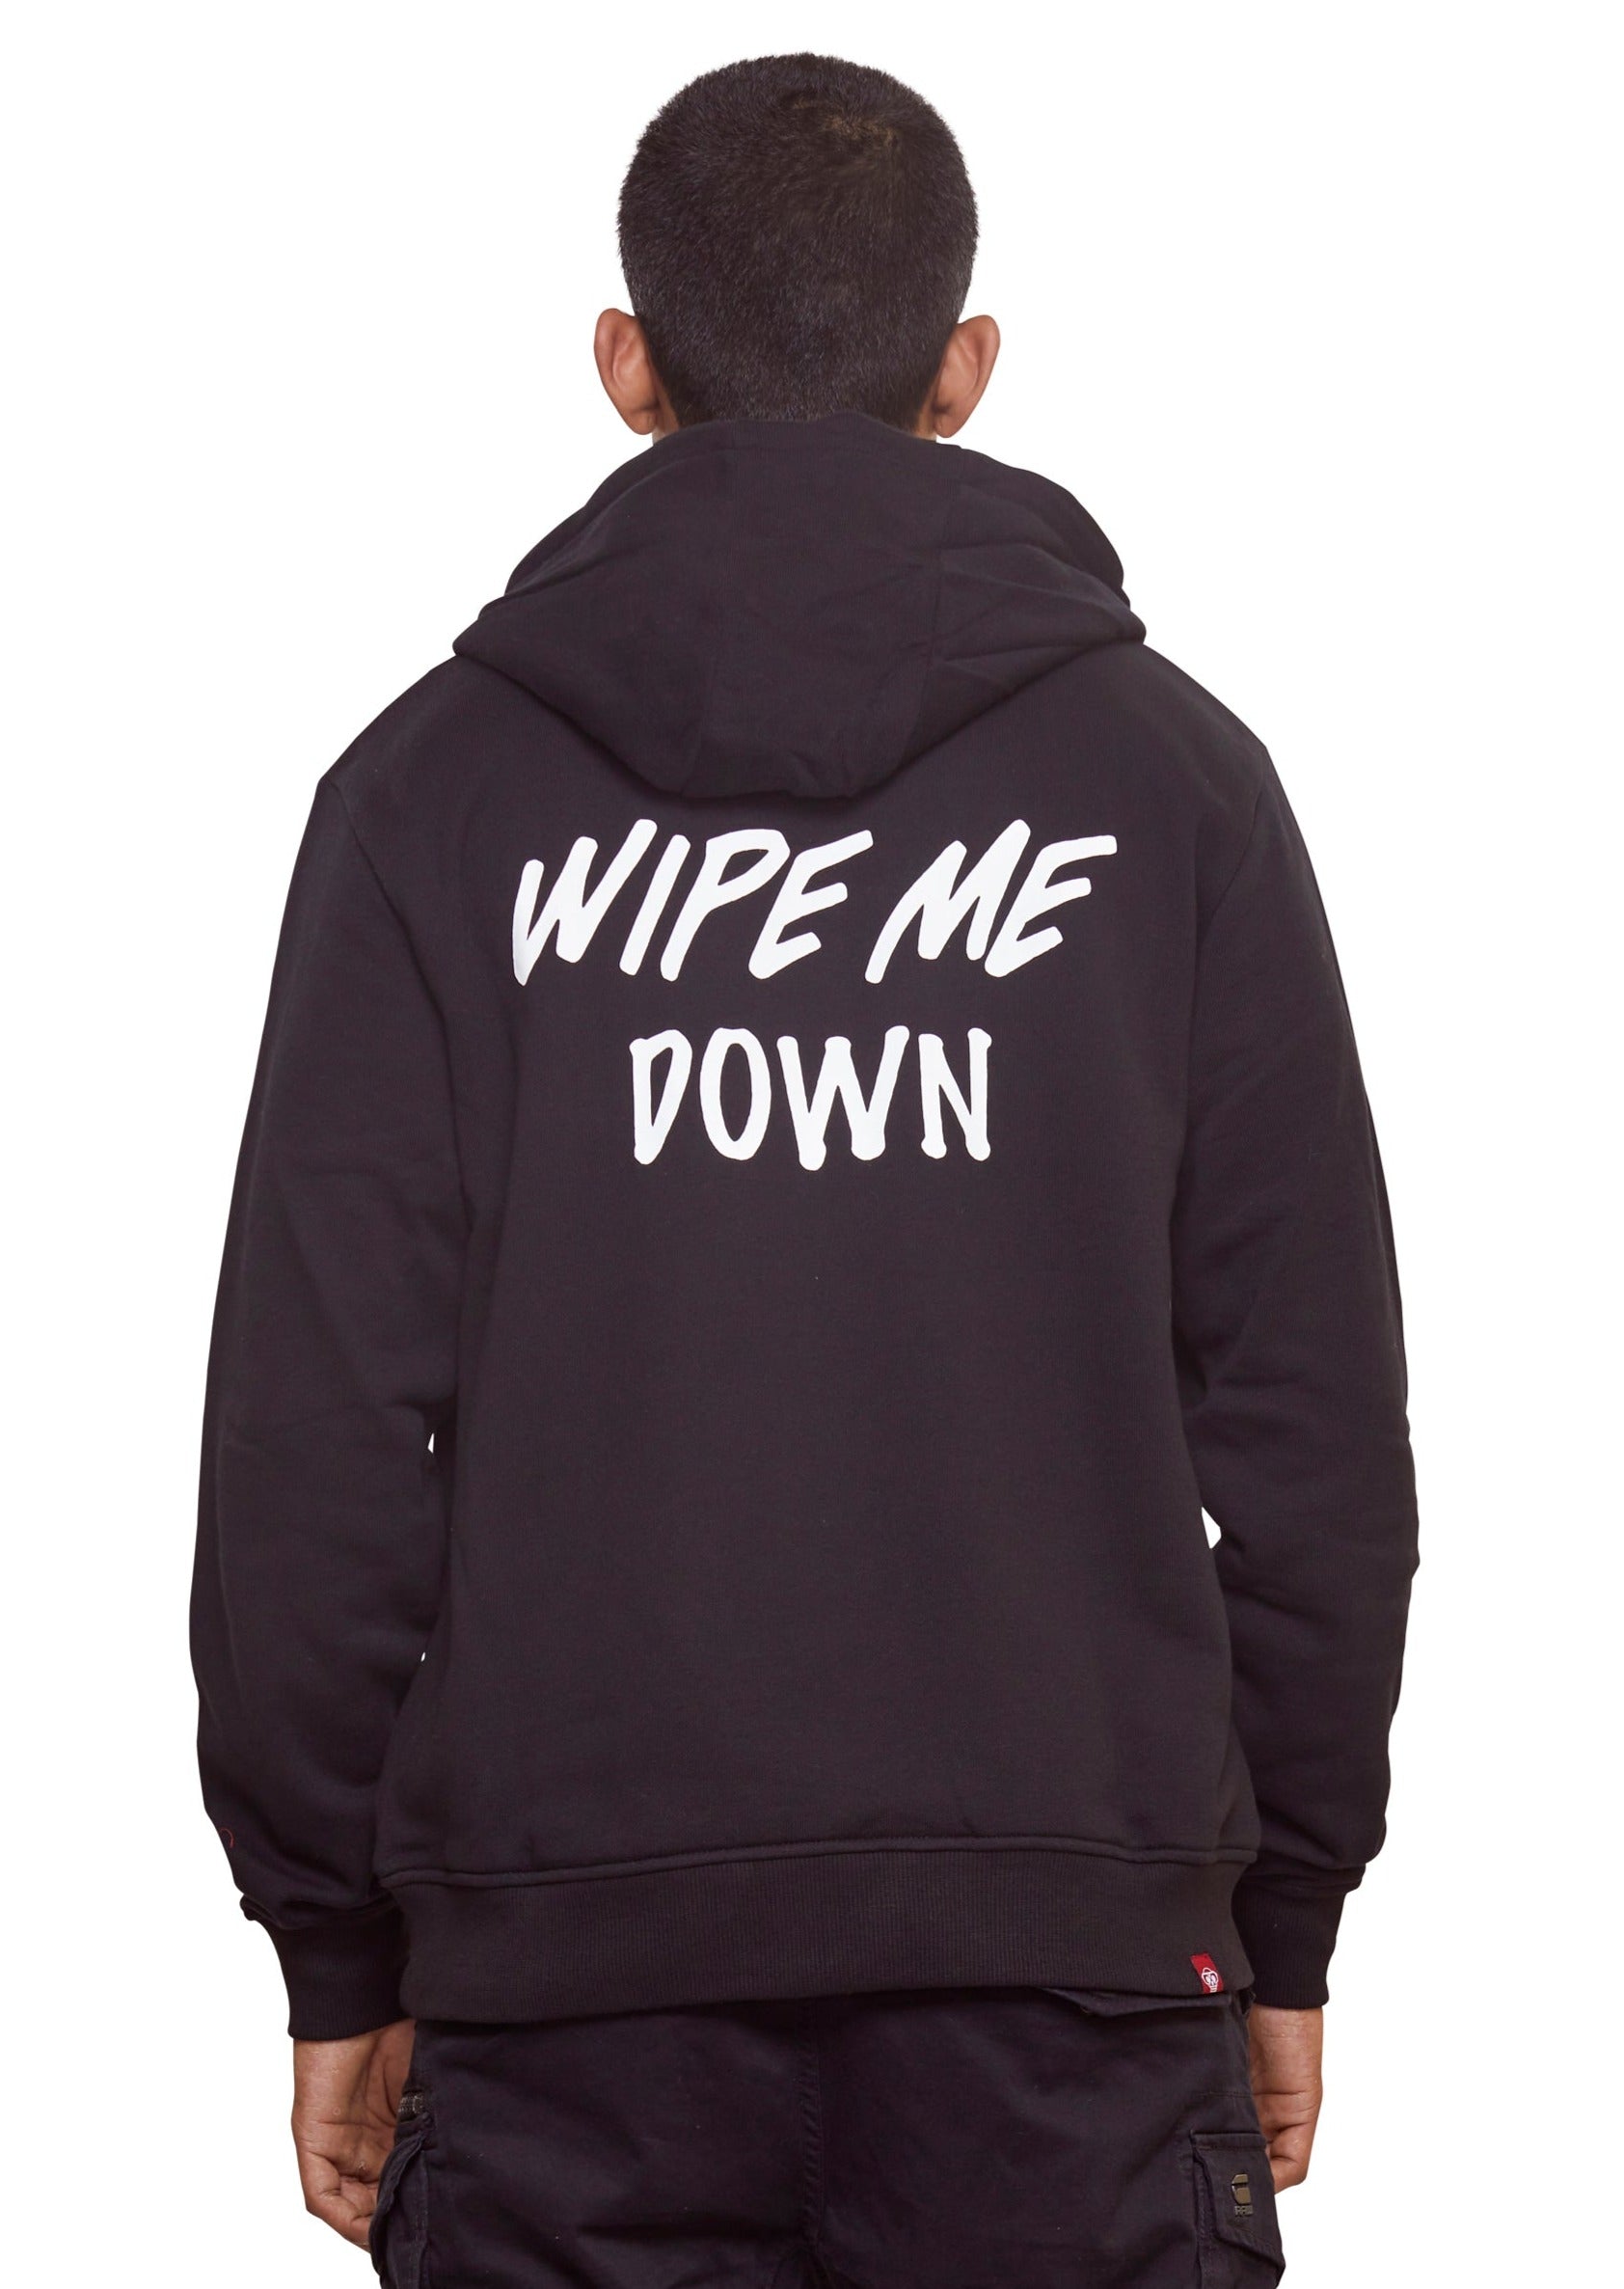 Black cotton hoodie with Signature "8-Bit" pixelated silicone appliquÃ© at chest and Slogan print at the back.